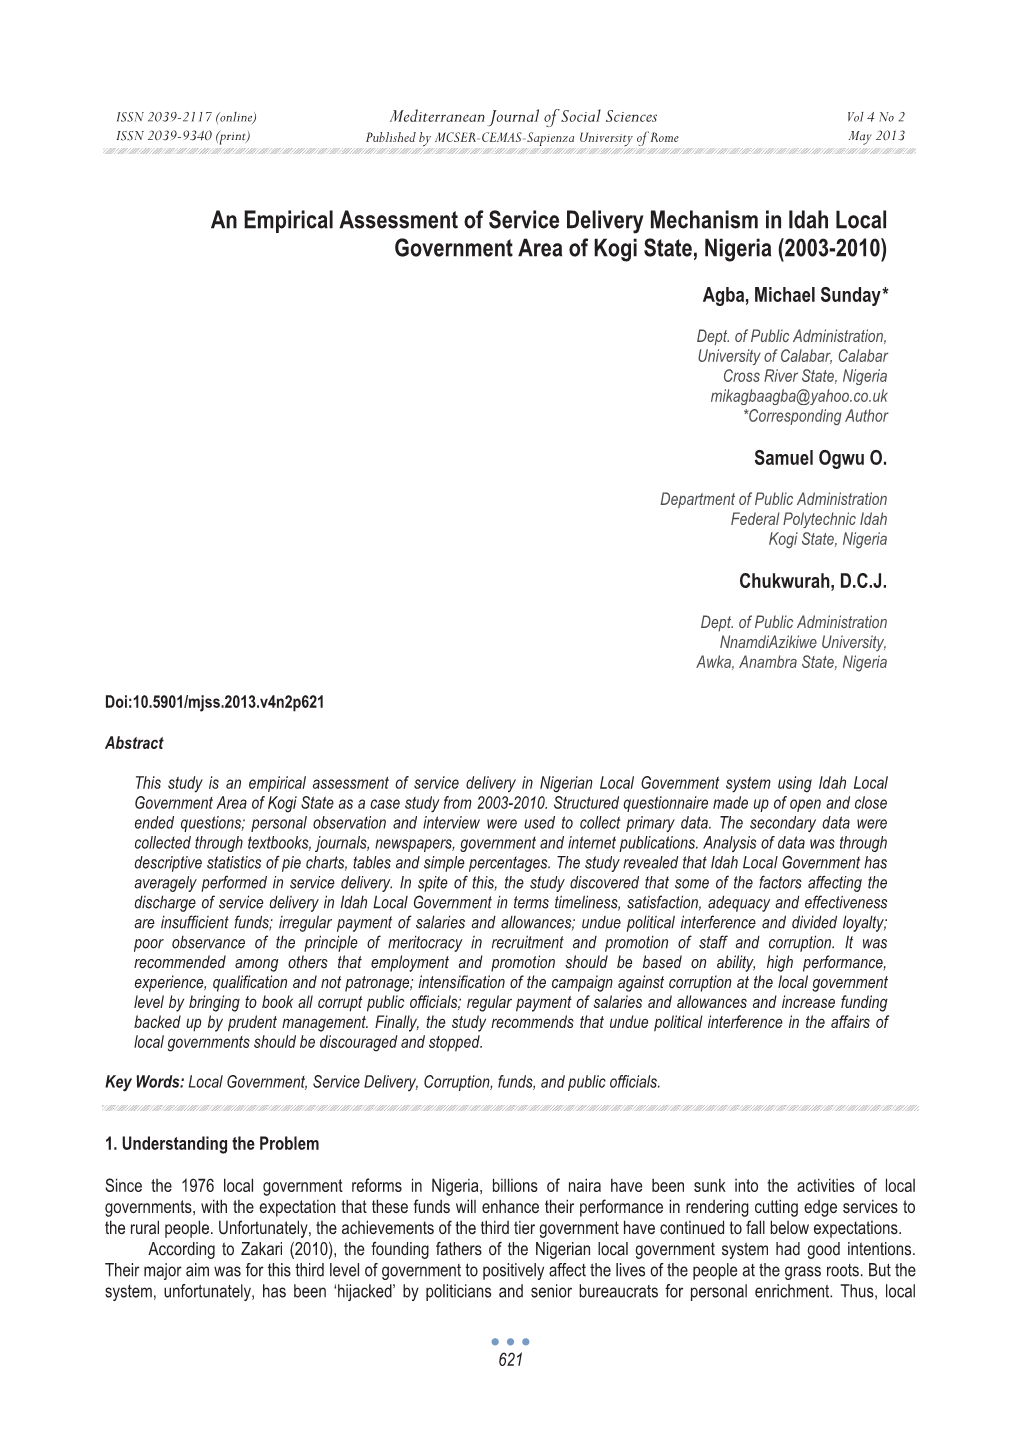 An Empirical Assessment of Service Delivery Mechanism in Idah Local Government Area of Kogi State, Nigeria (2003-2010)